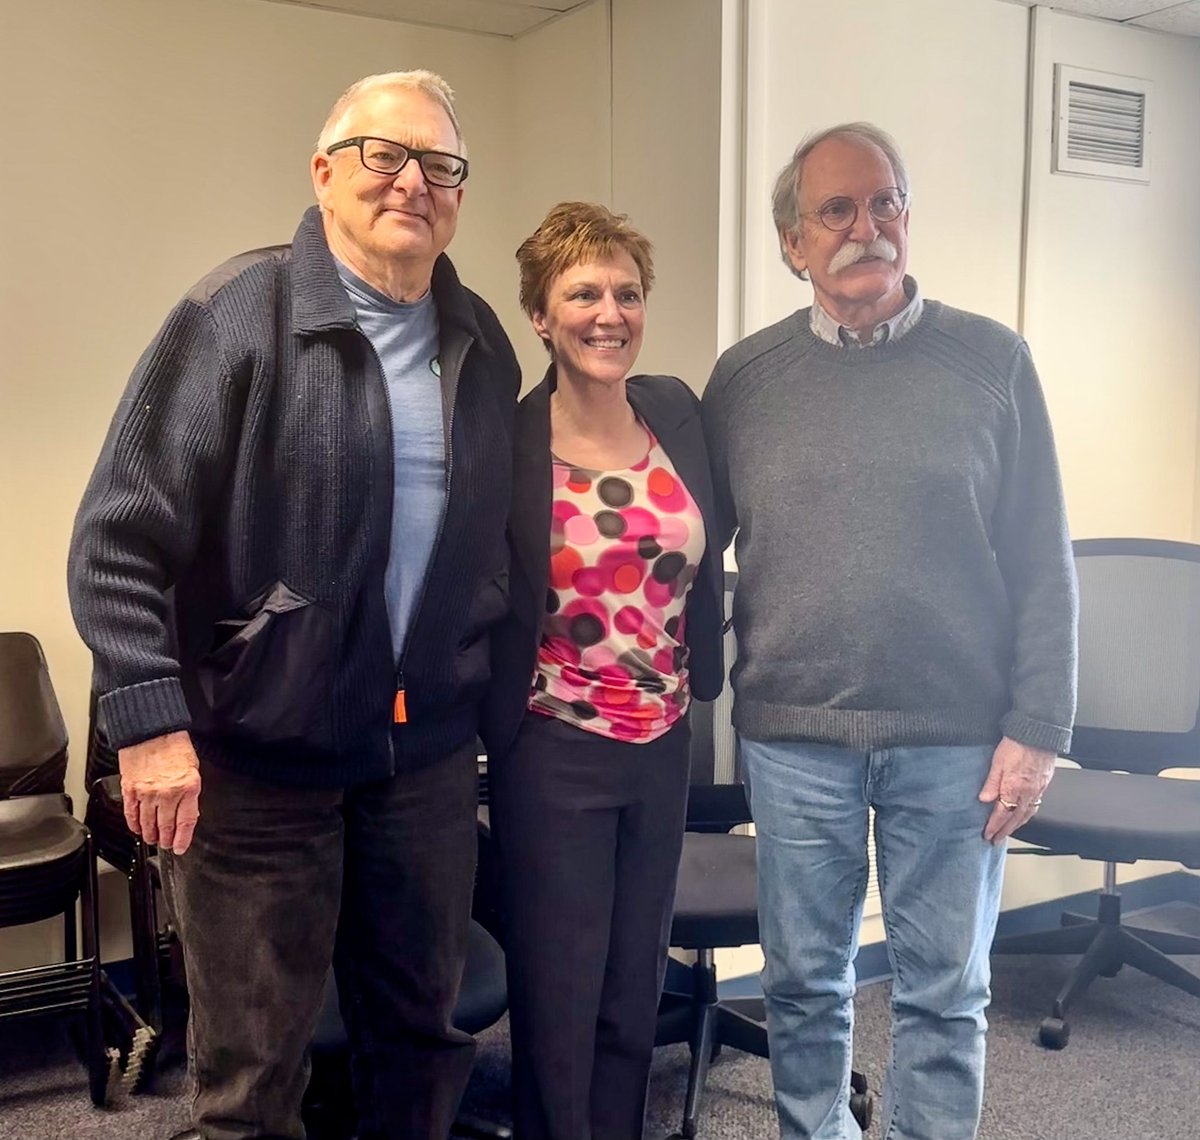 Anne Giles, a 1981 History Department alumna, reunited with professors Glenn Bugh and Roger Ekirch yesterday! Bugh and Ekirch both have fond memories of Anne as a great student. It was an enjoyable reunion for everyone involved! 😊